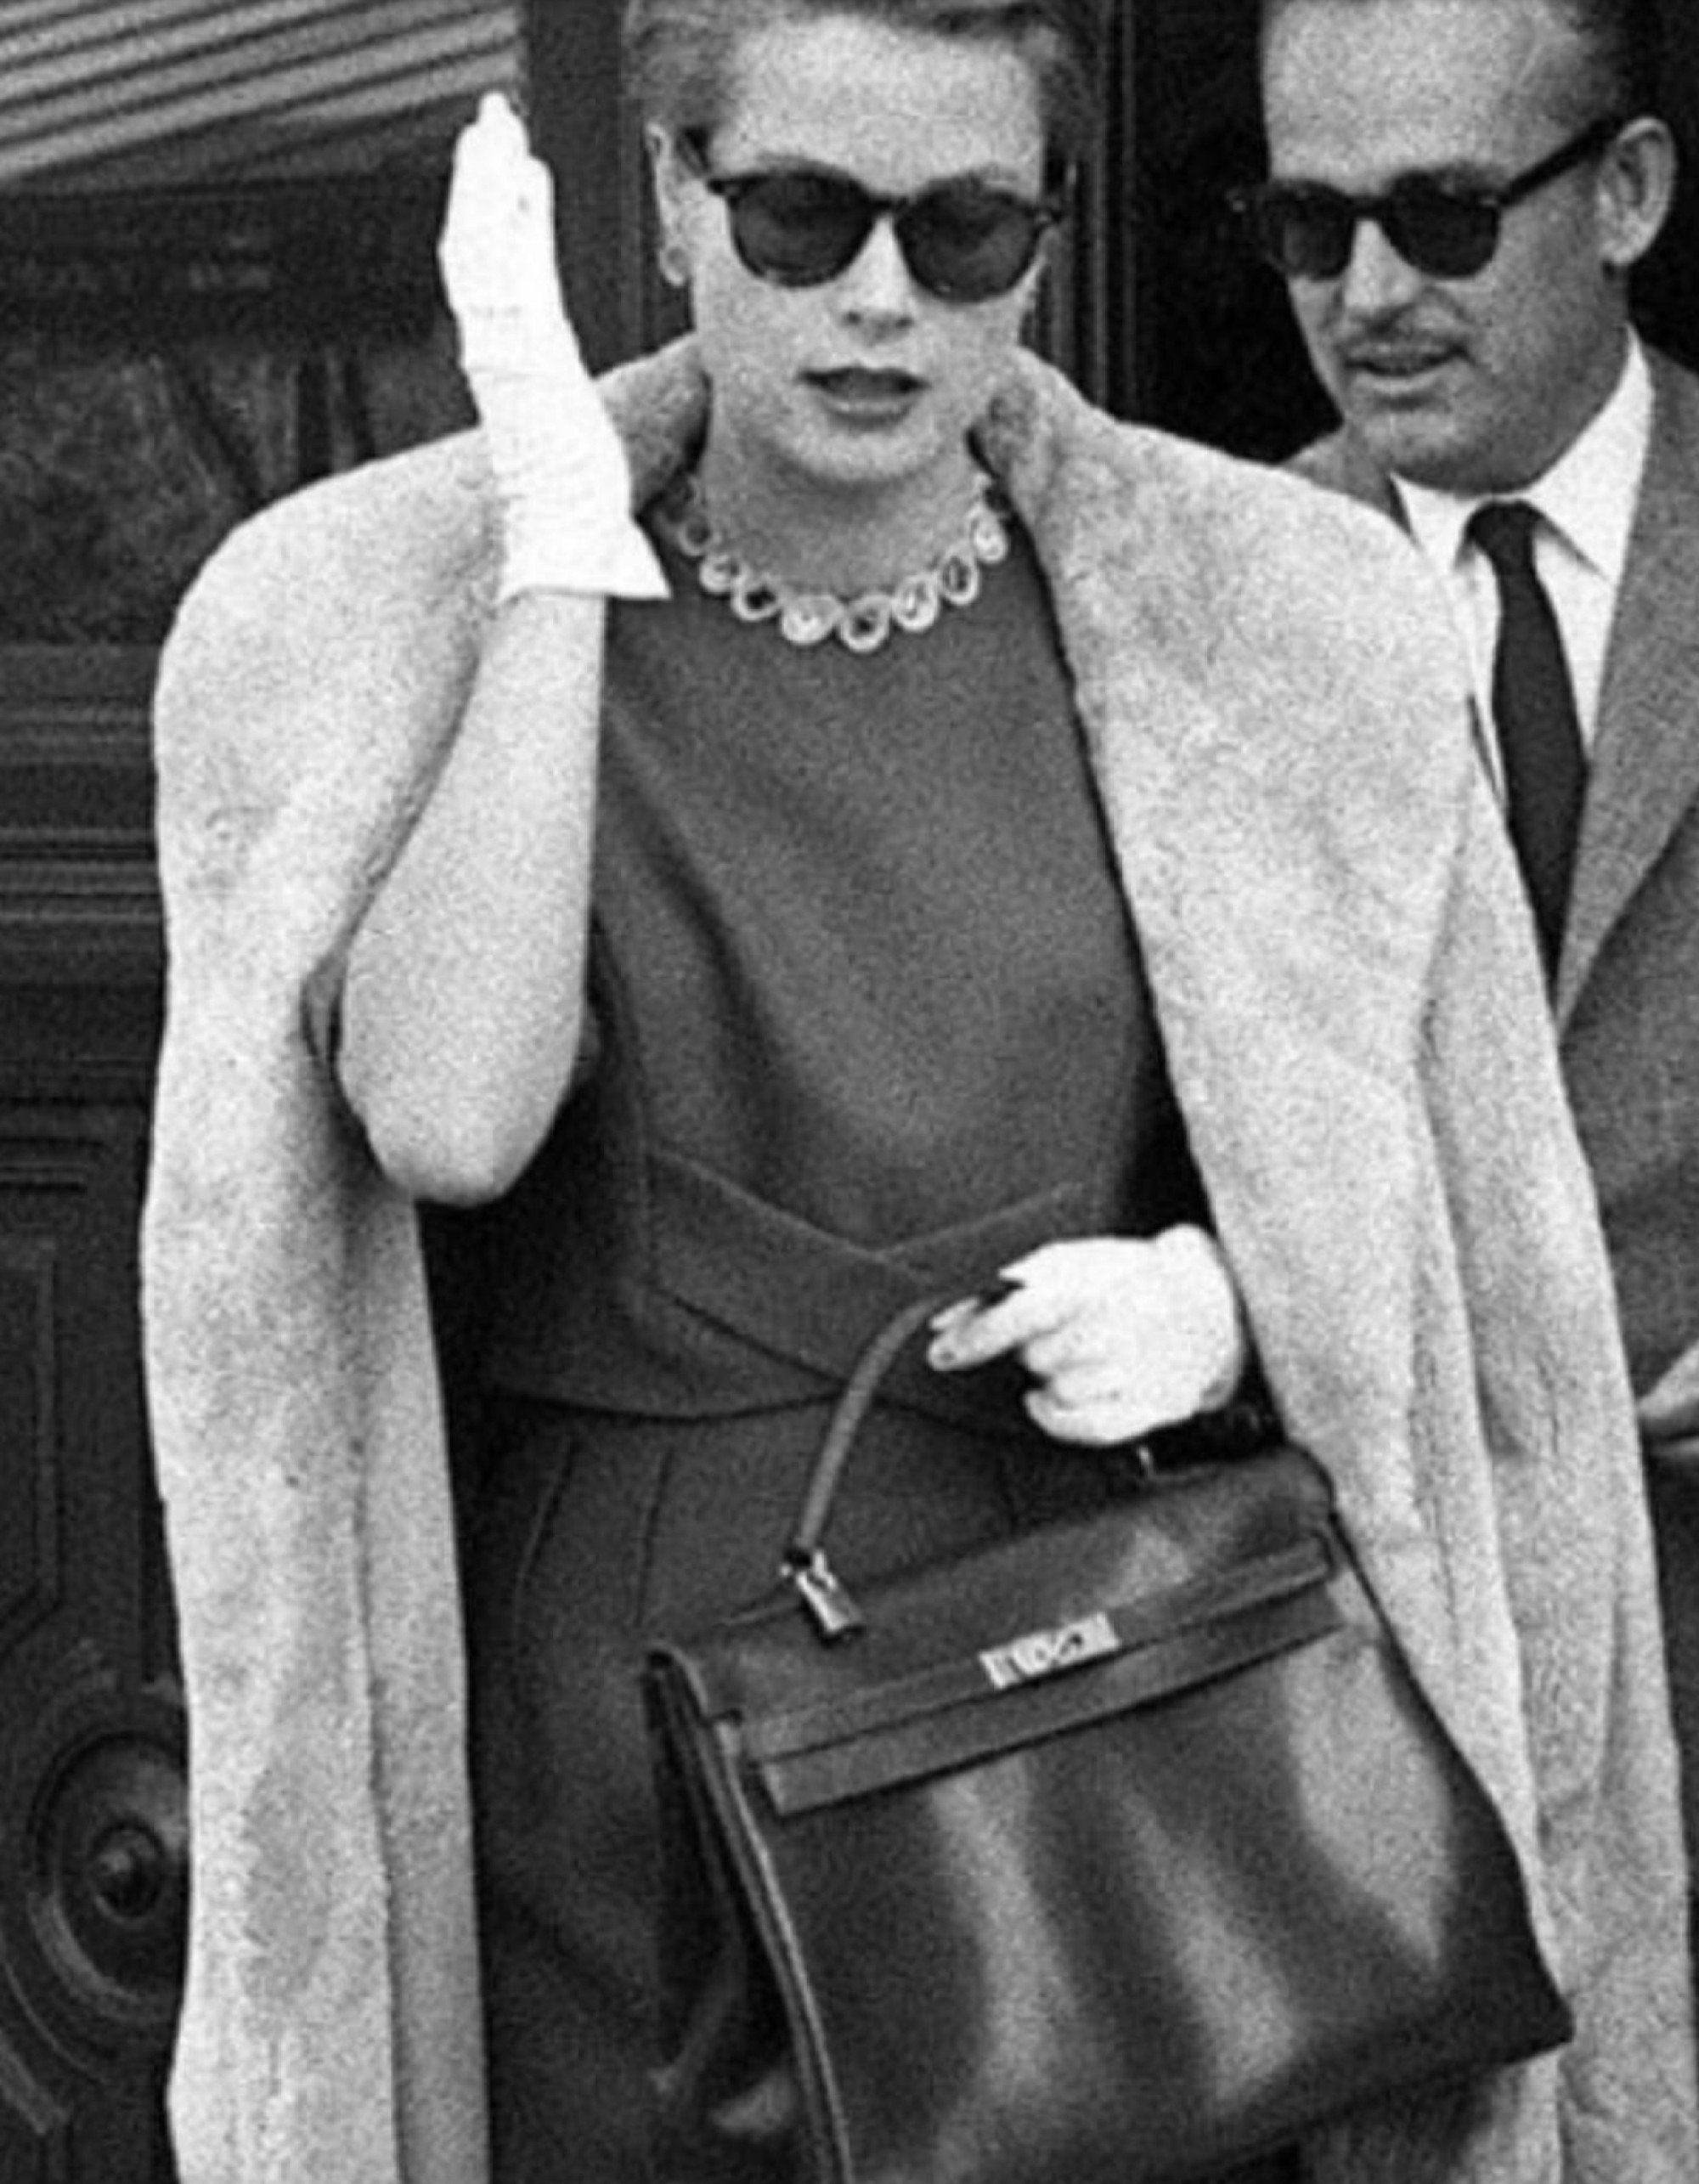 7 designer handbags named after famous female icons: from royals